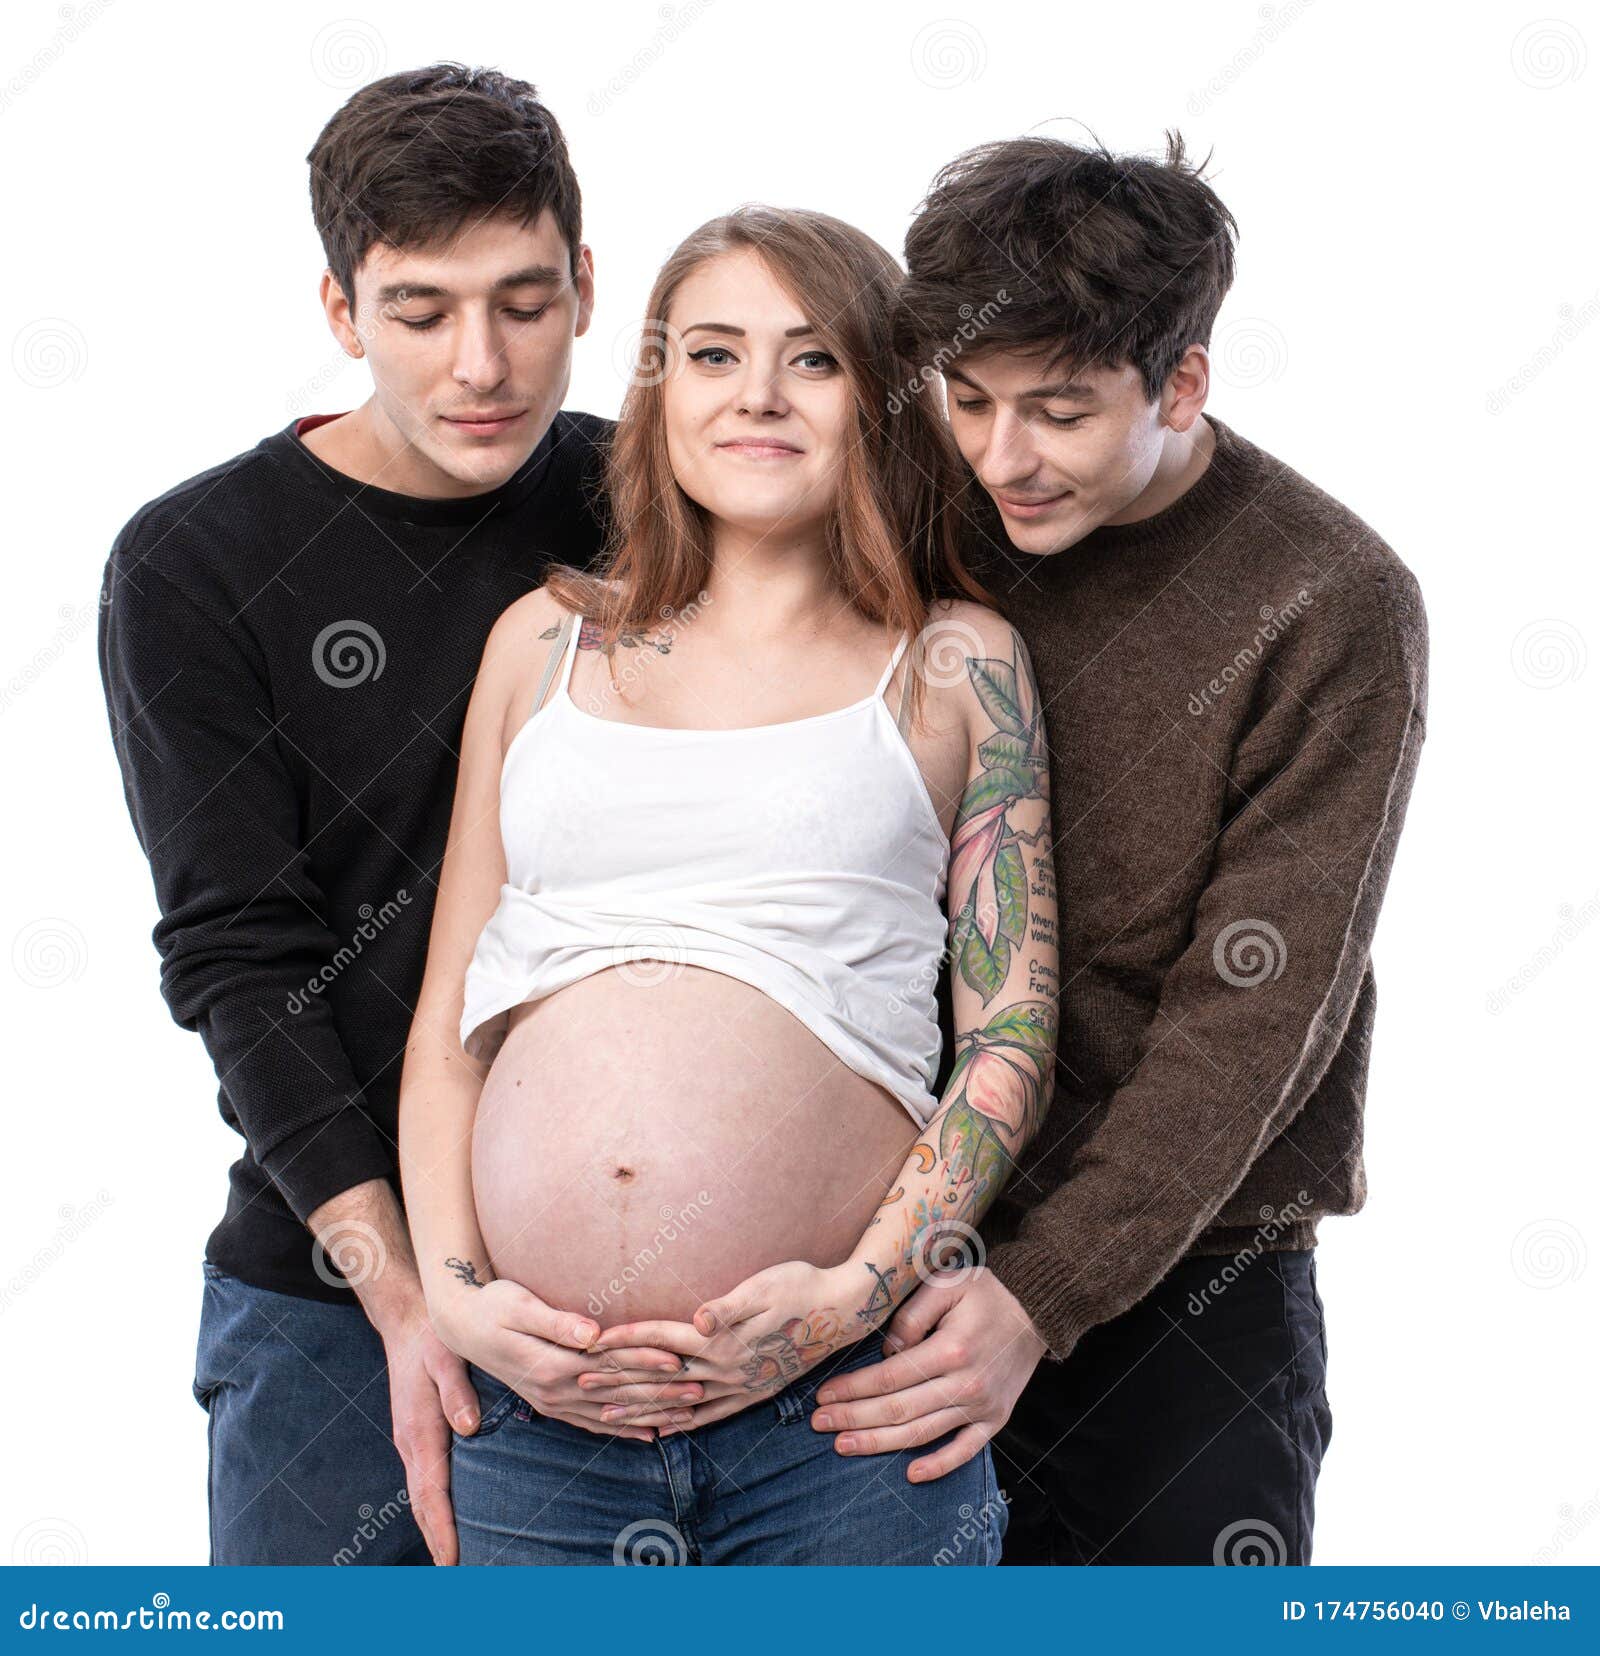 Young Pregnant Woman Posing With Two Young Man On A White Background ...